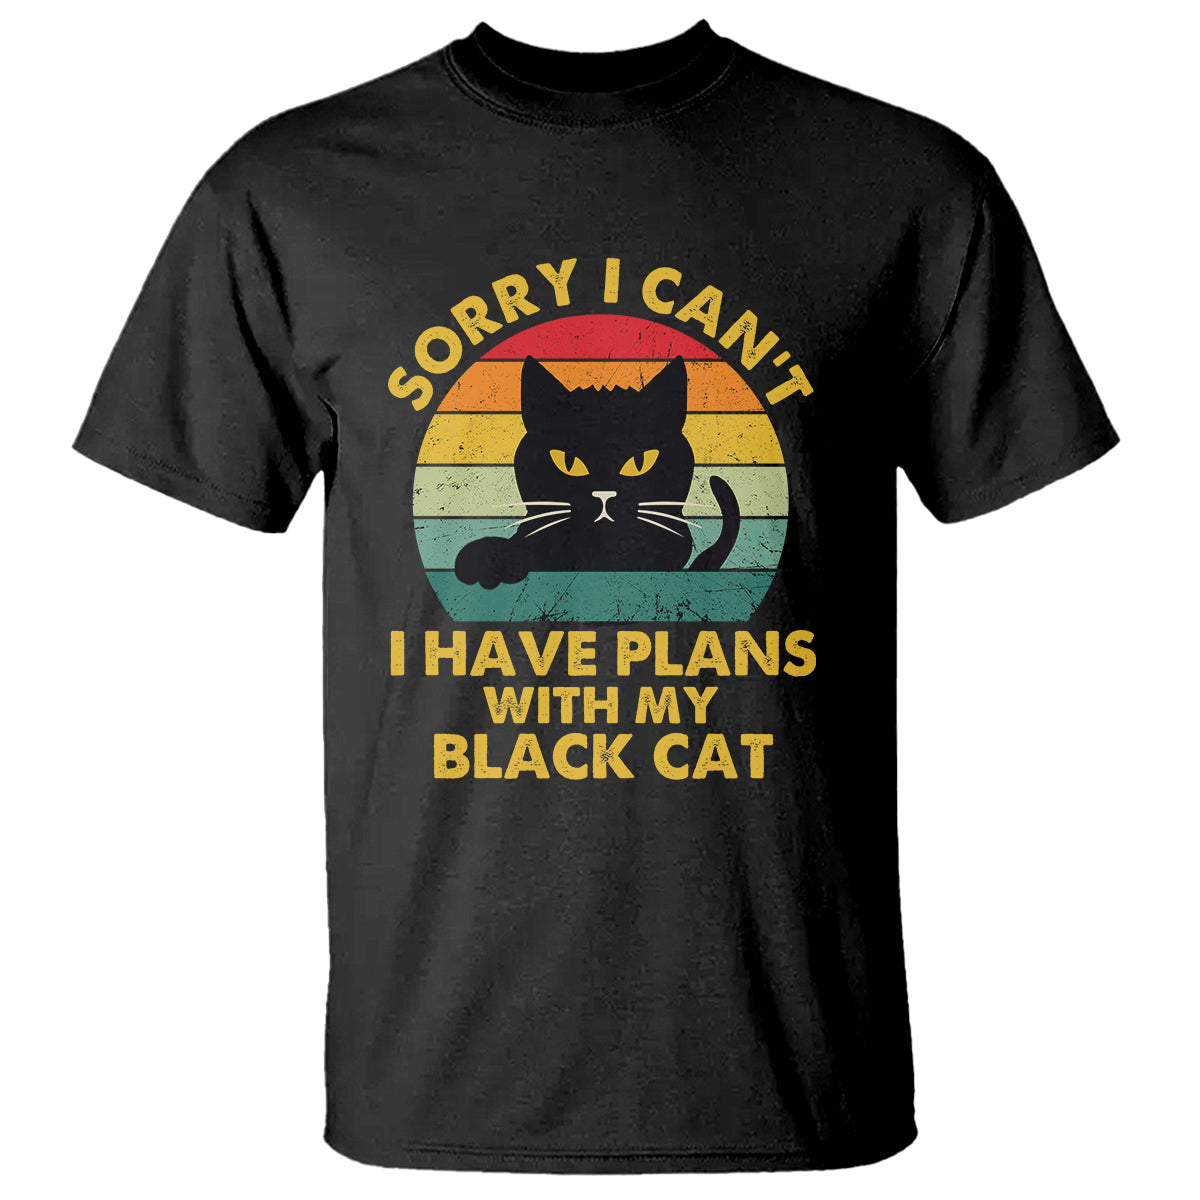 Cat Lover T Shirt Sorry I Can't I Have Plans With My Black Cat TS02 Black Printyourwear